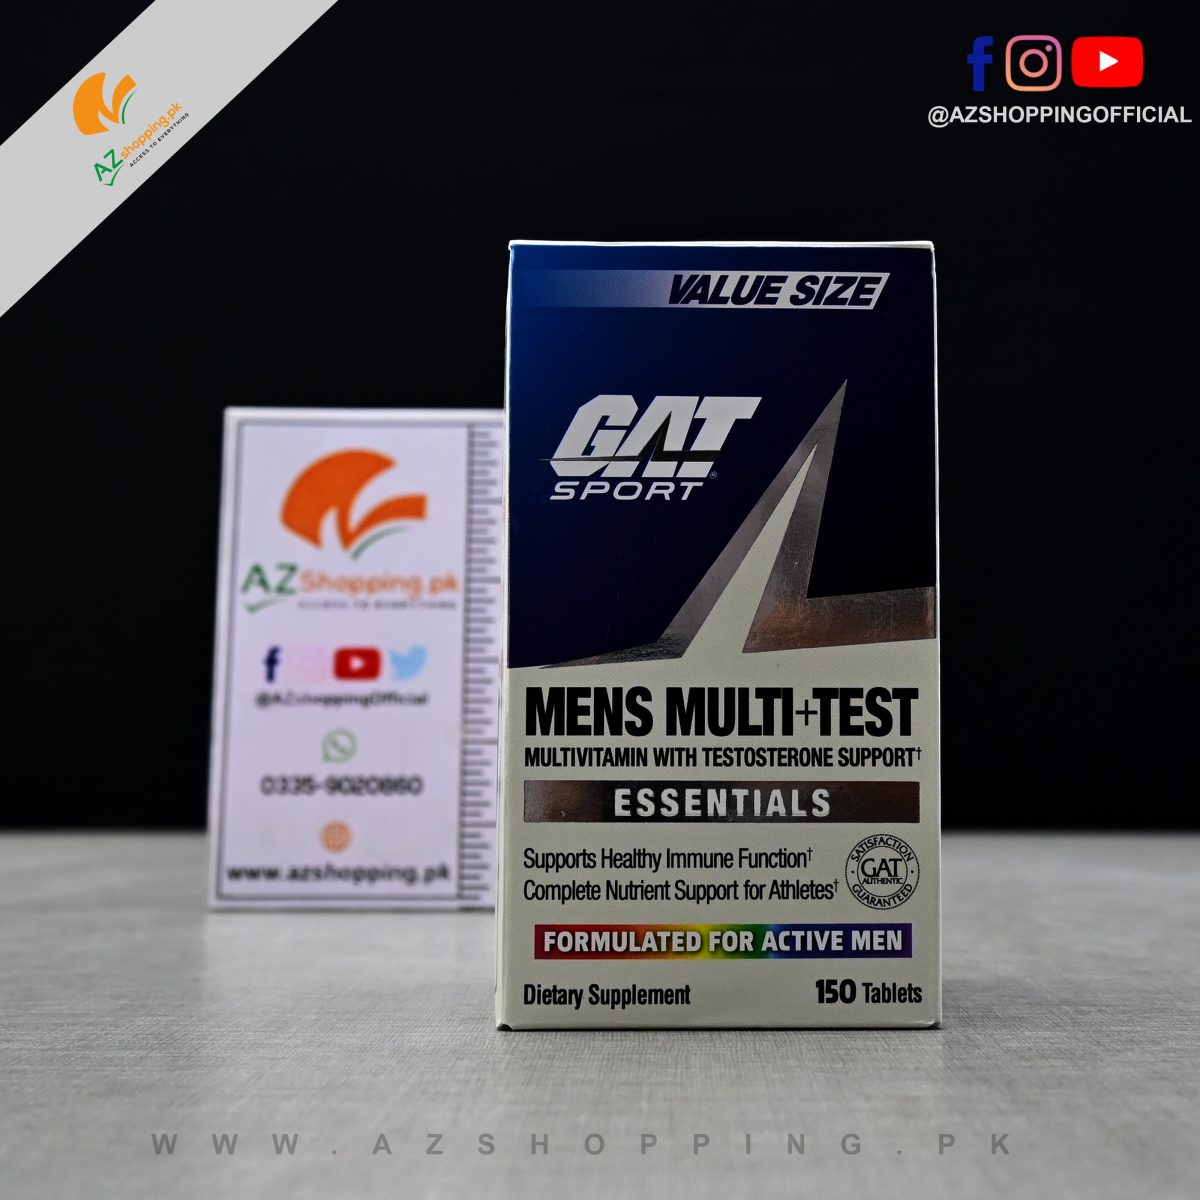 GAT Sport – Mens Multi + Test Multivitamin With Testosterone Support - Essentials – Supports Healthy Immune Function & Complete Nutrient Support For Athletes - 150 Tablets